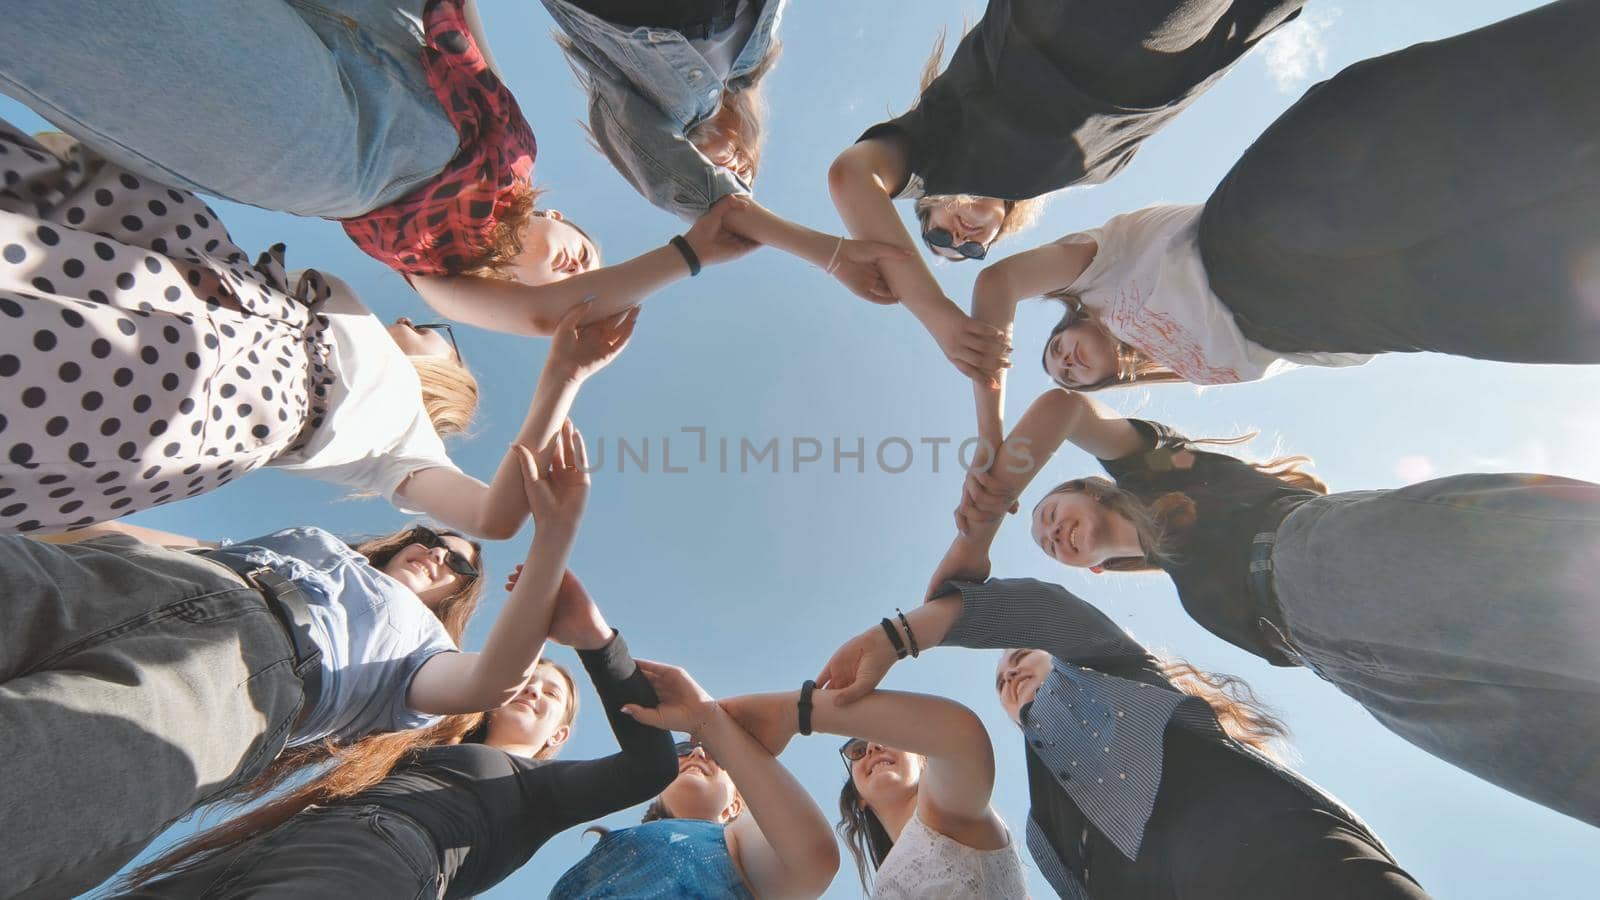 A group of girls makes a circle shape holding each other's hands